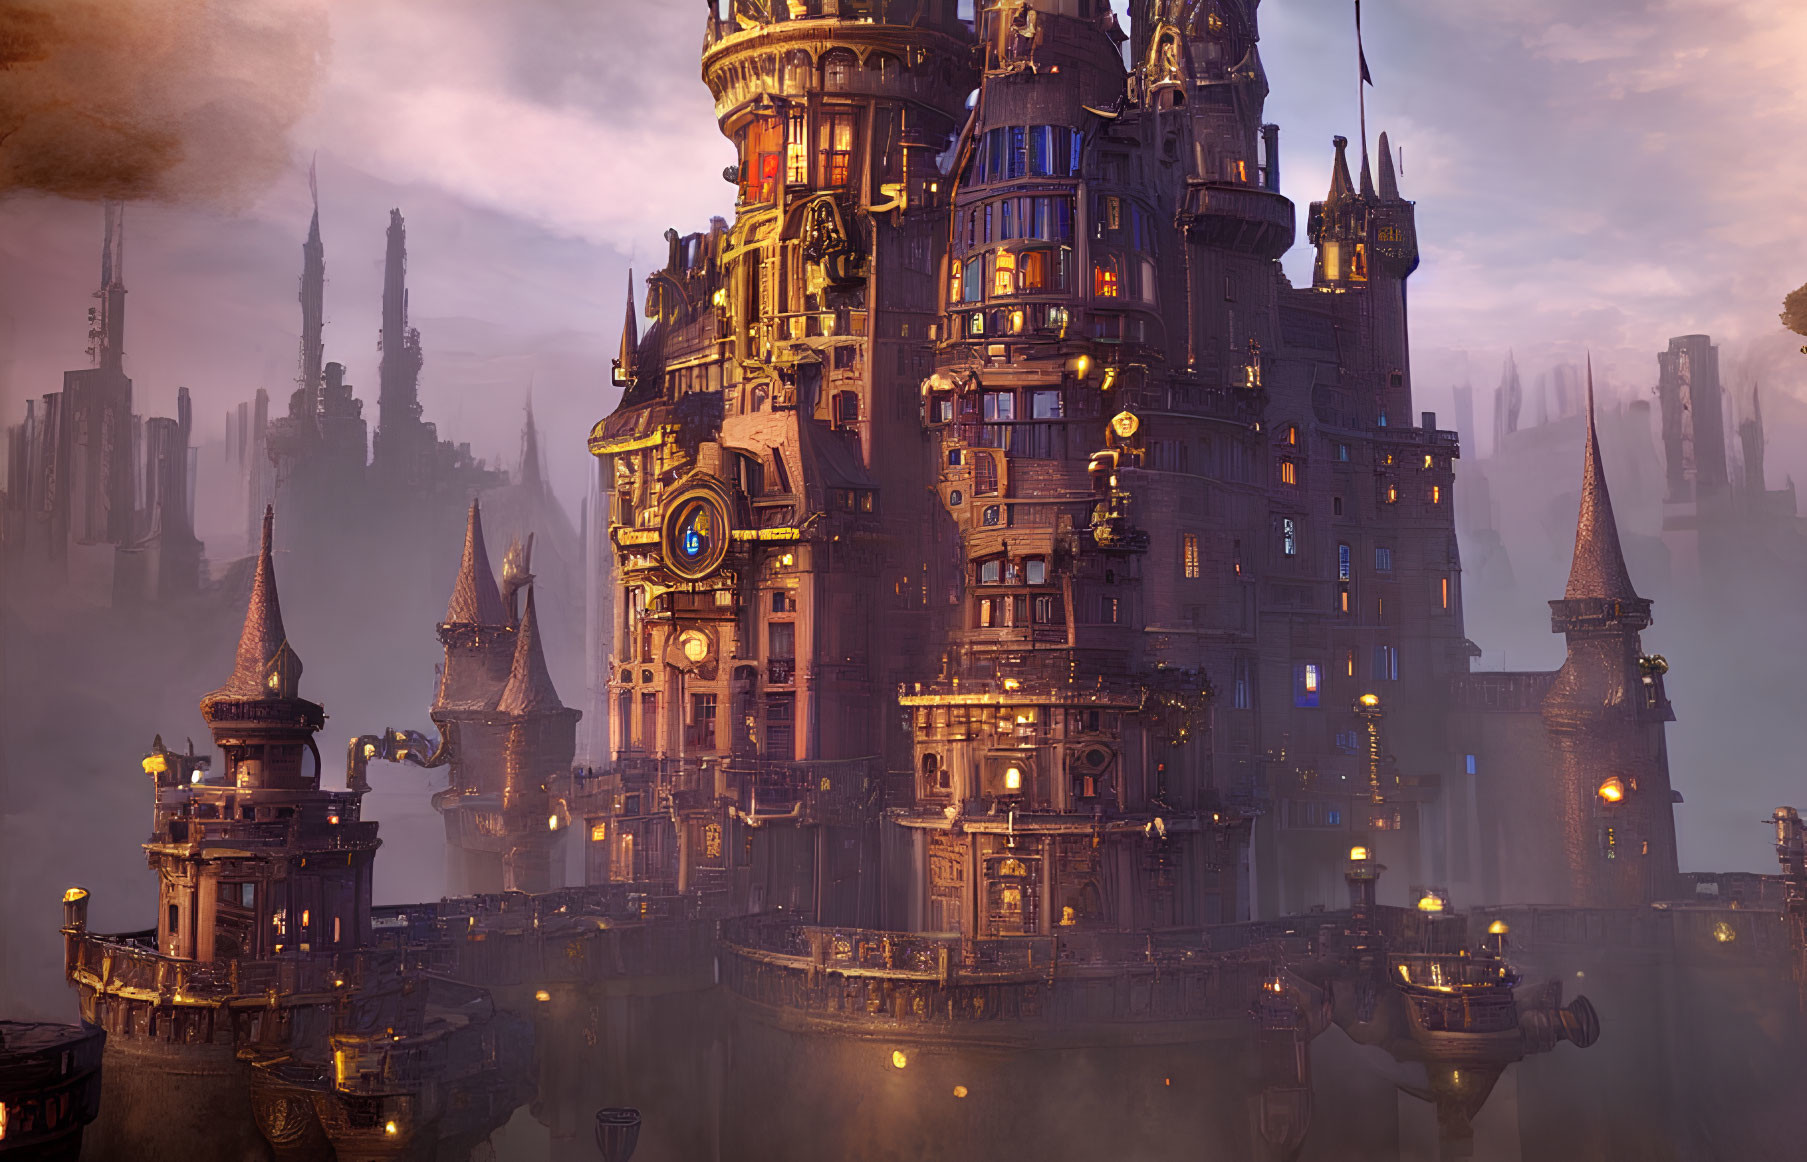 Fantasy castle with ornate towers in rosy sky